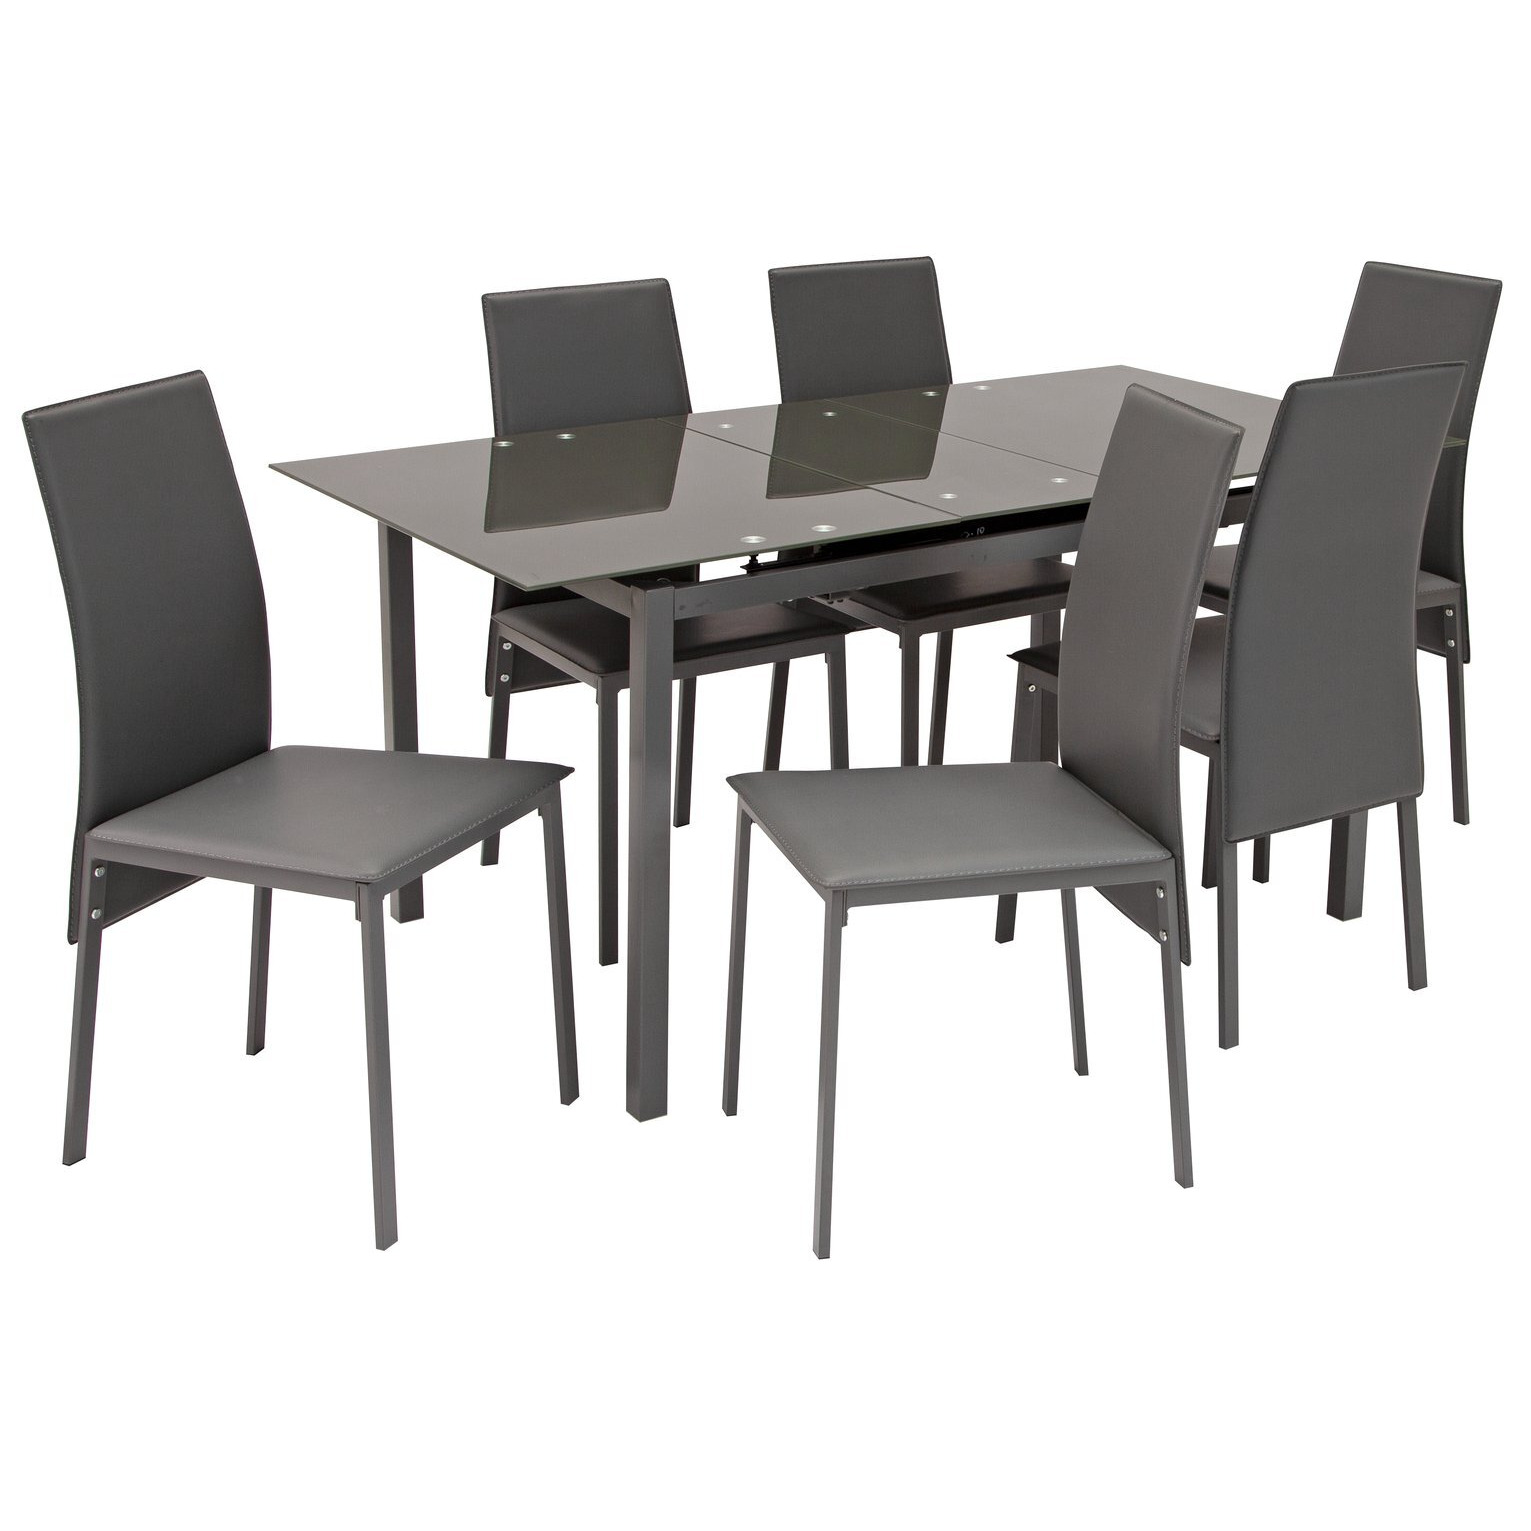 Argos Home Lido Glass Extending Dining Table & 6 Grey Chairs - image 1